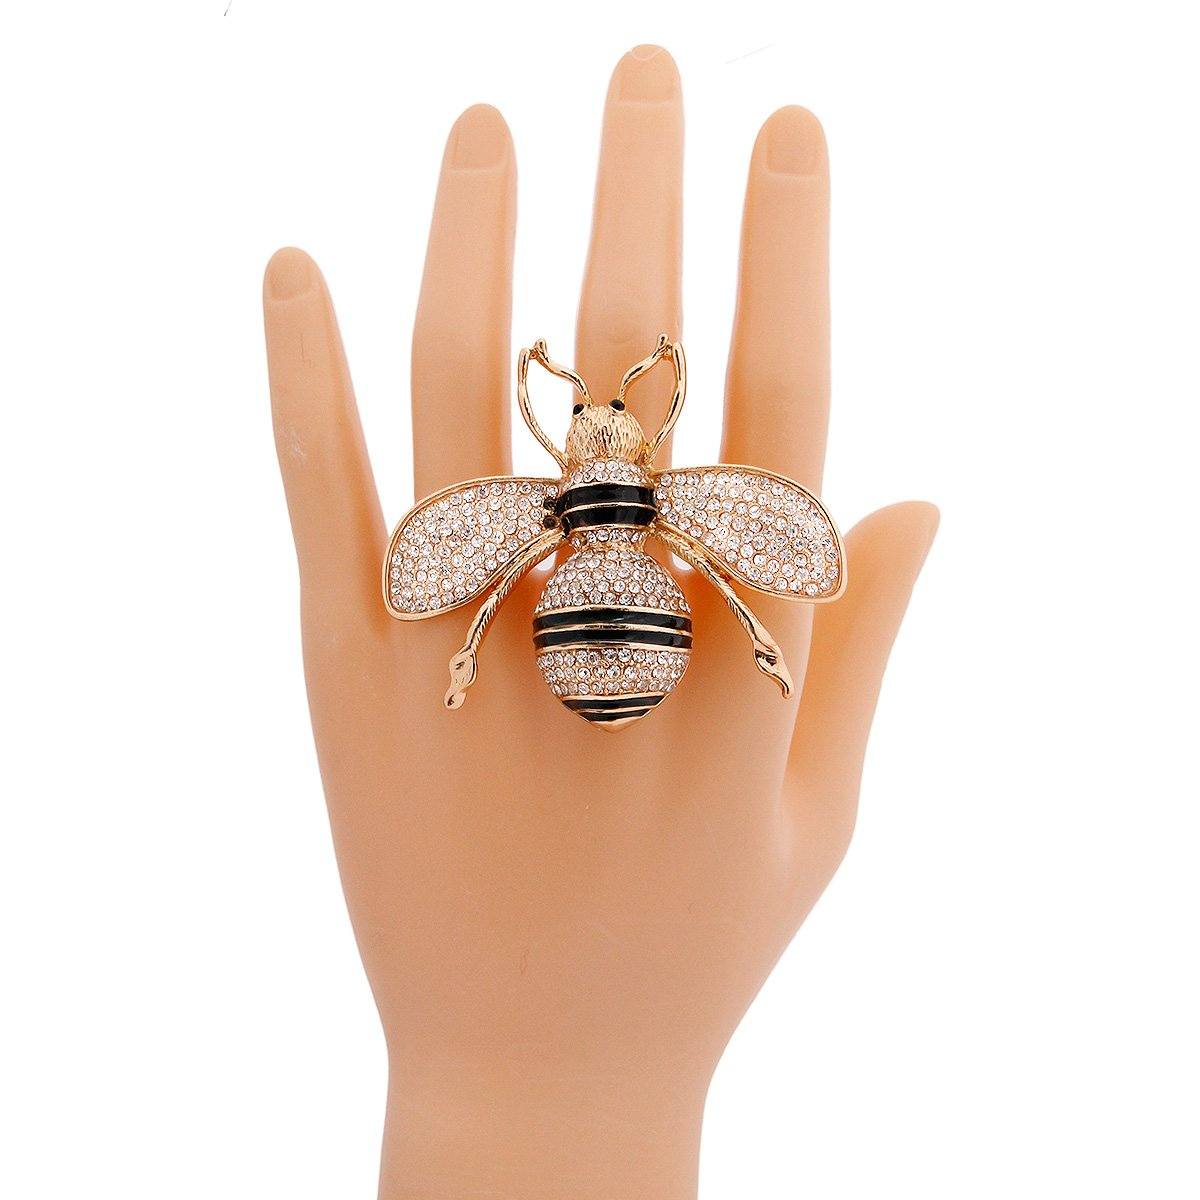 Designer Style Gold and Rhinestone Bee Stretch Ring